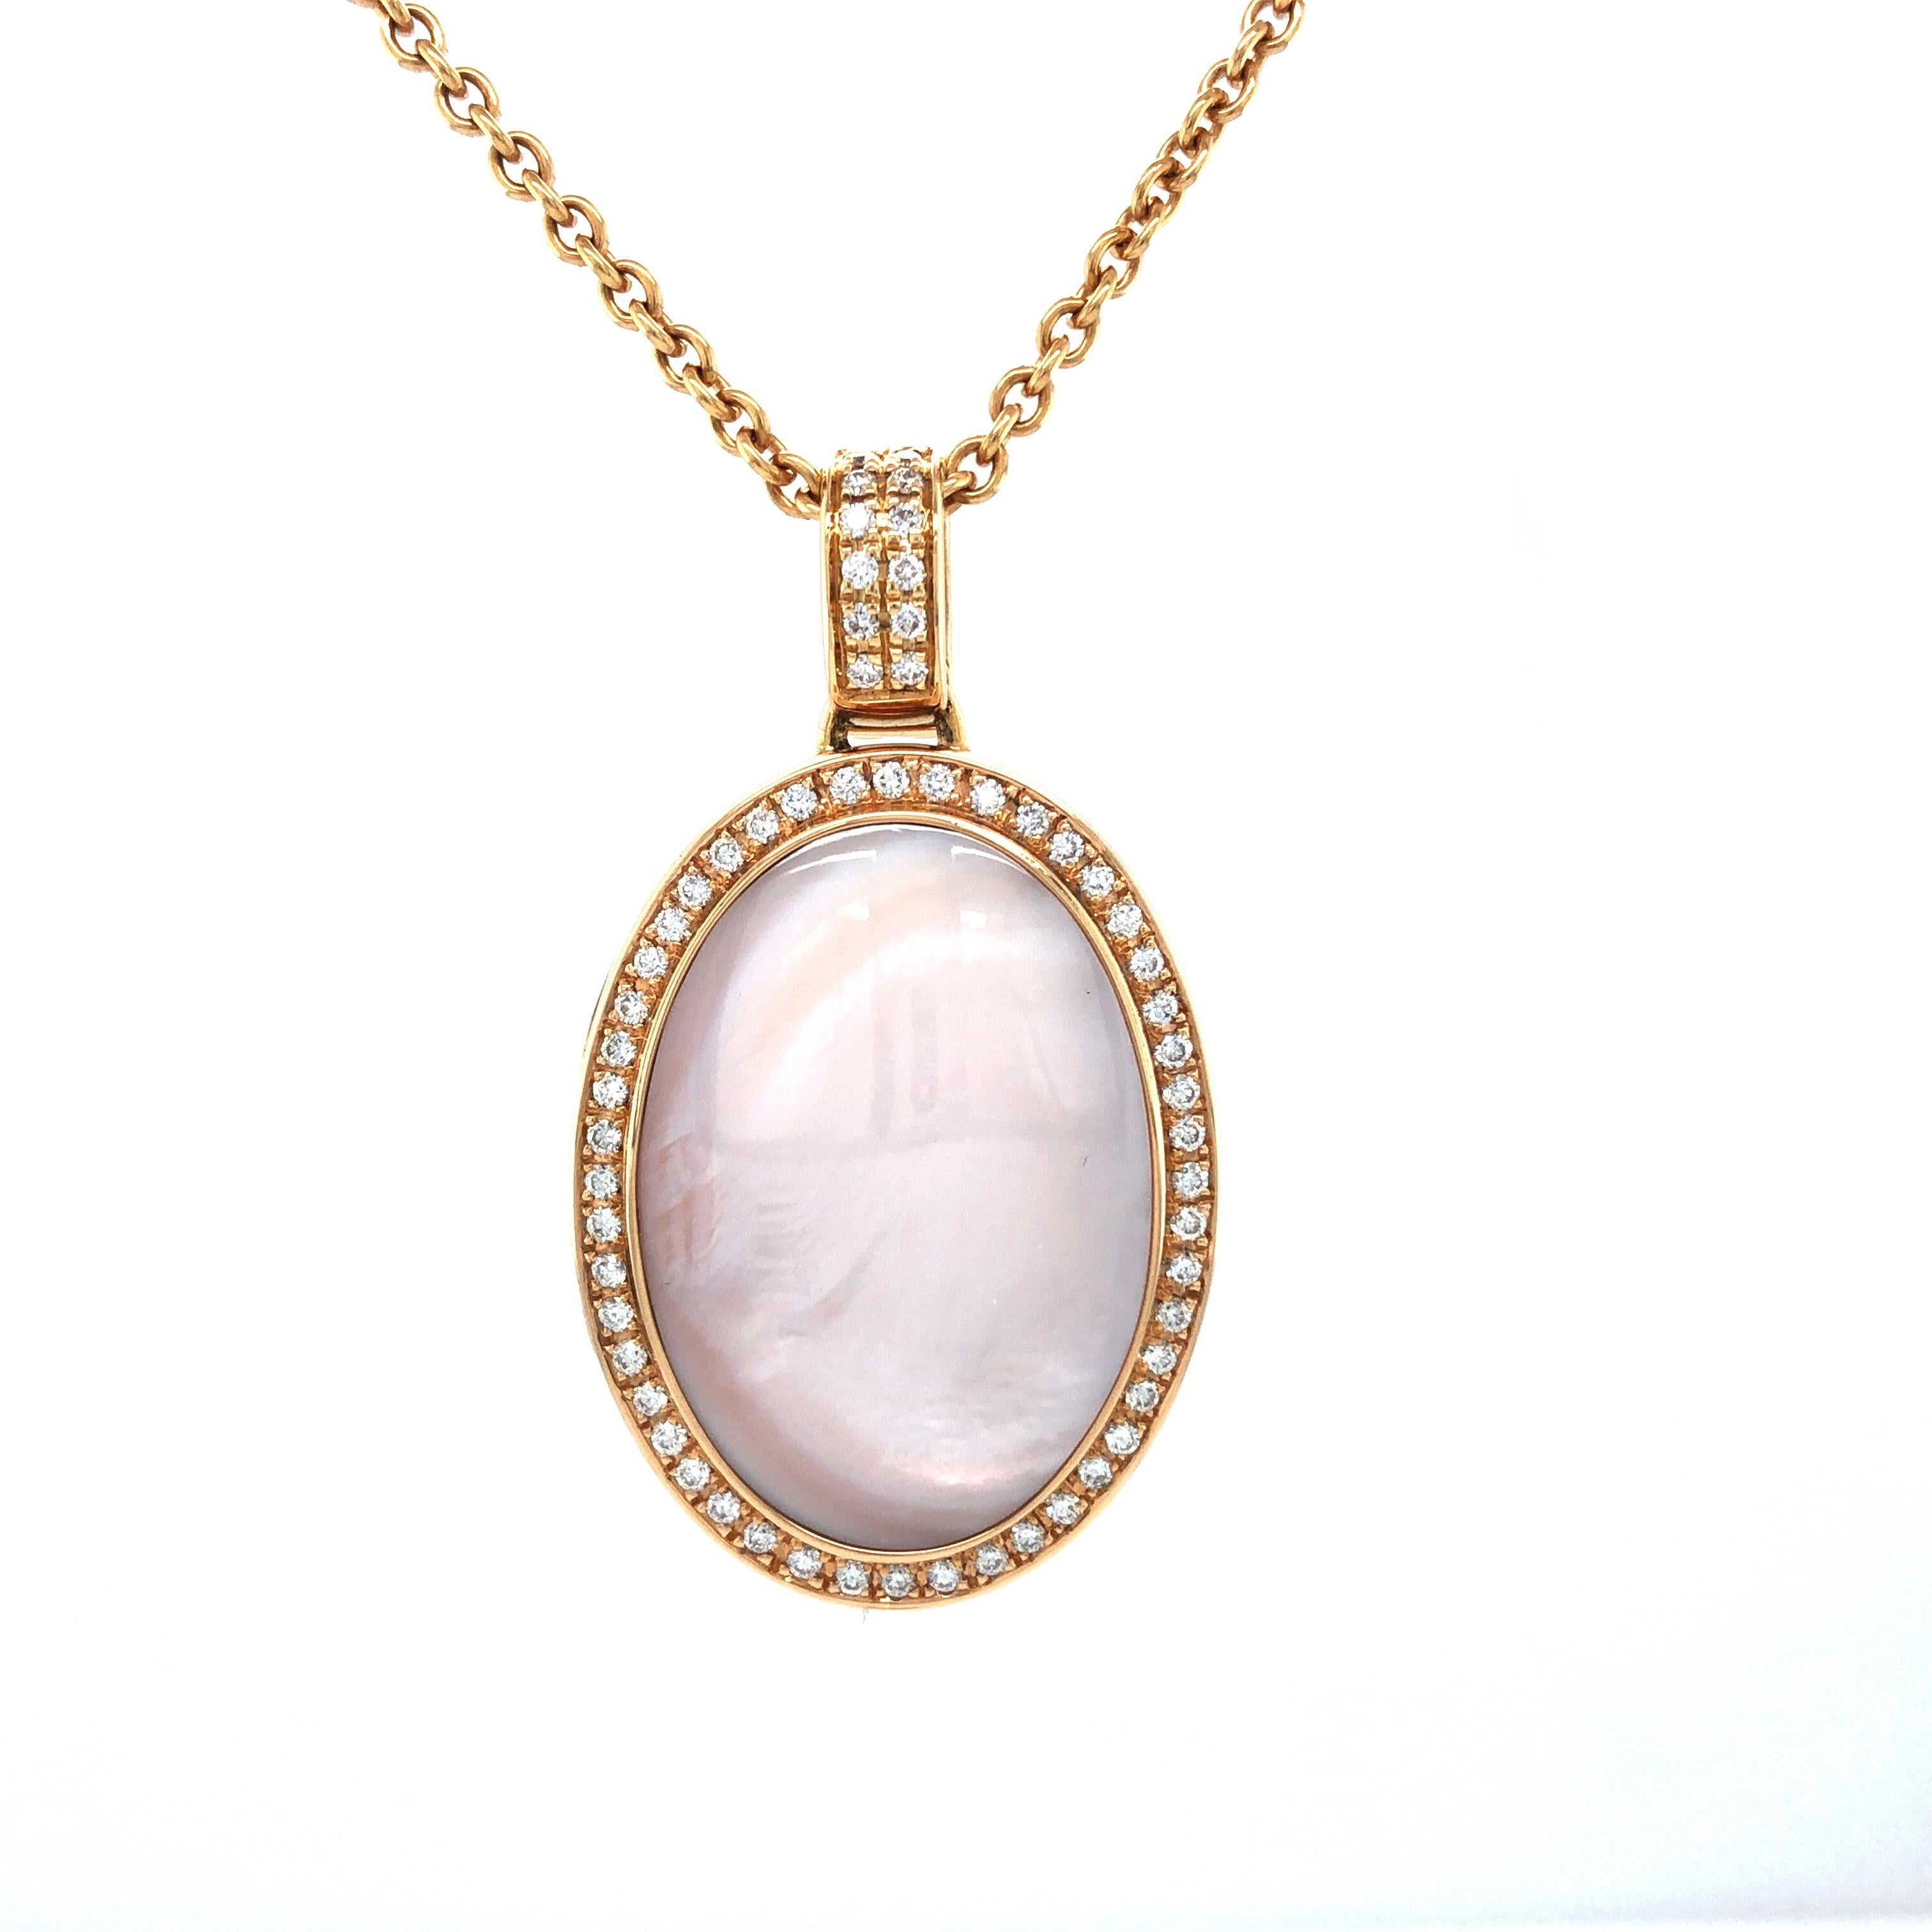 Victor Mayer customizable oval pendant locket necklace 18k yellow gold, Hallmark Collection, 60 diamonds, total 0.60 ct, H VS, 1 cut pearl pink, measurements app. 23.0 mm x 32.0 mm

About the creator Victor Mayer
Victor Mayer is internationally